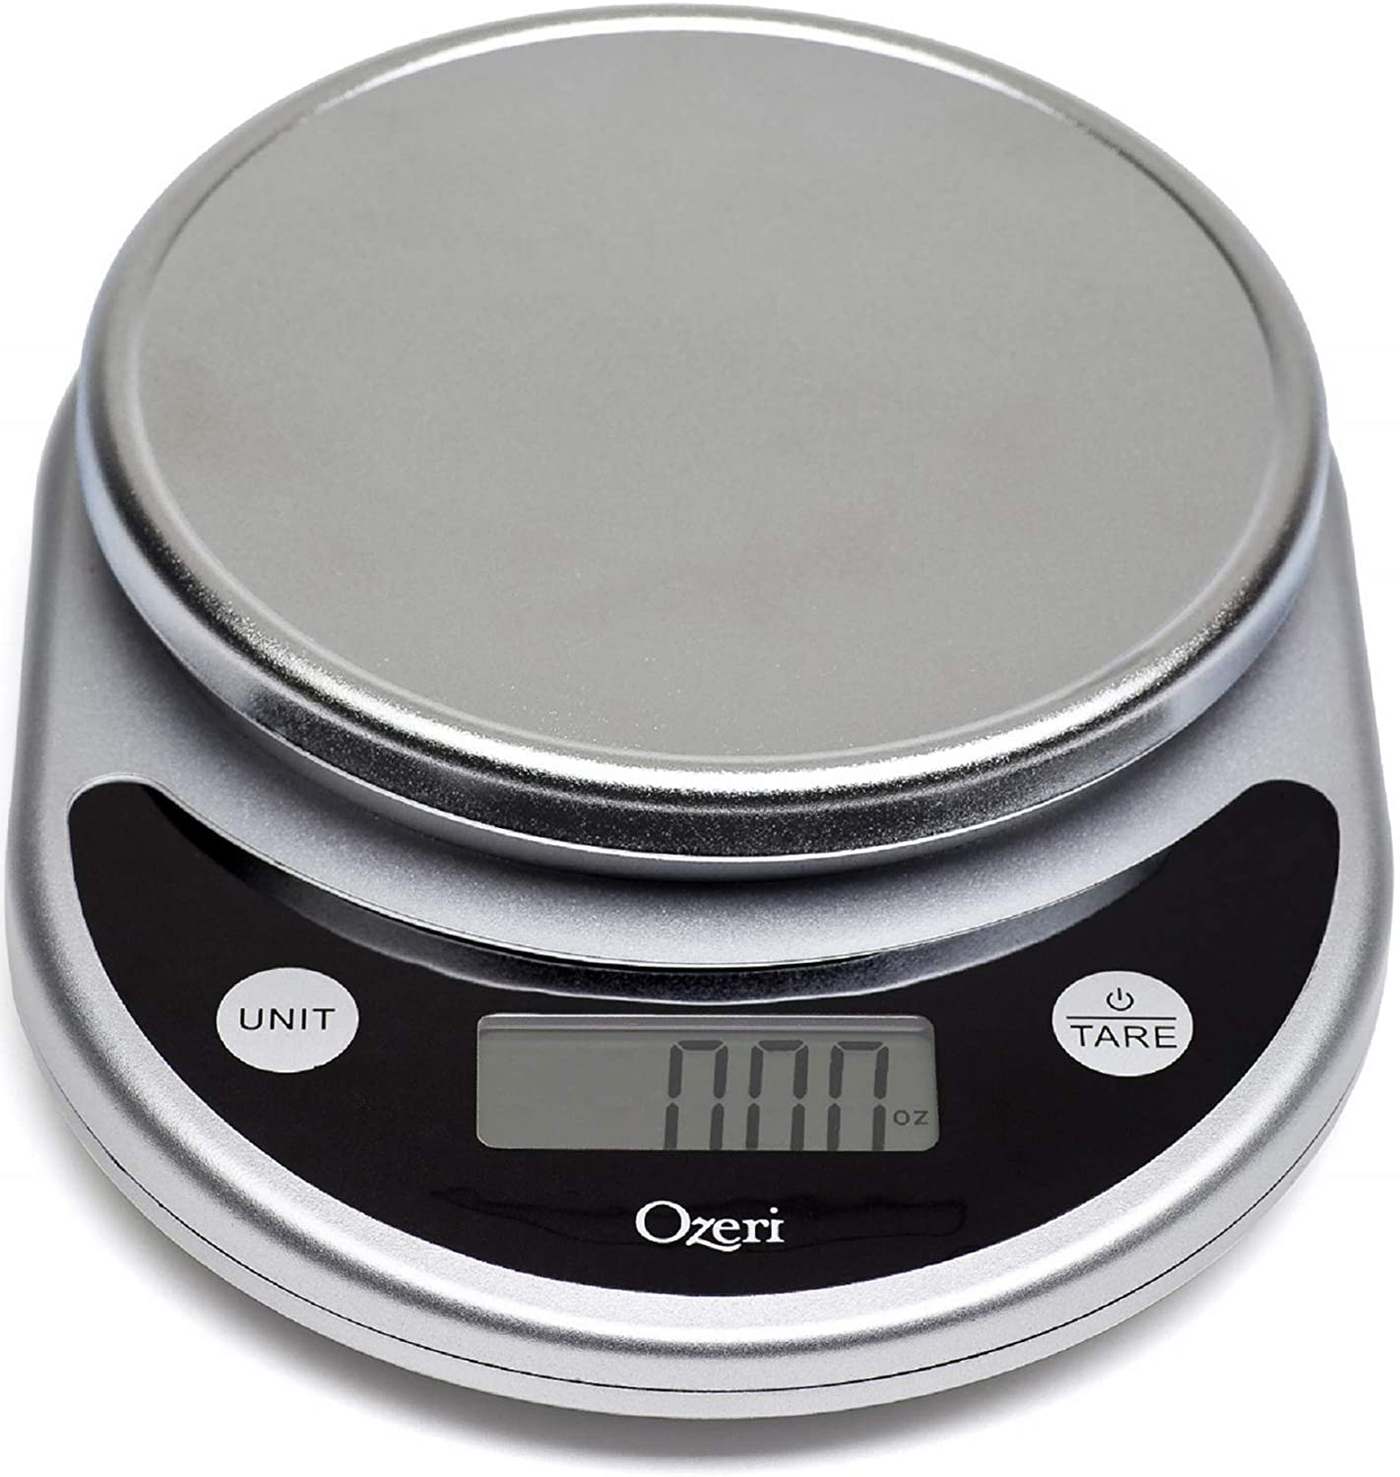 Ozeri Pronto Digital Multifunction Kitchen and Food Scale, Compact, Lime Green